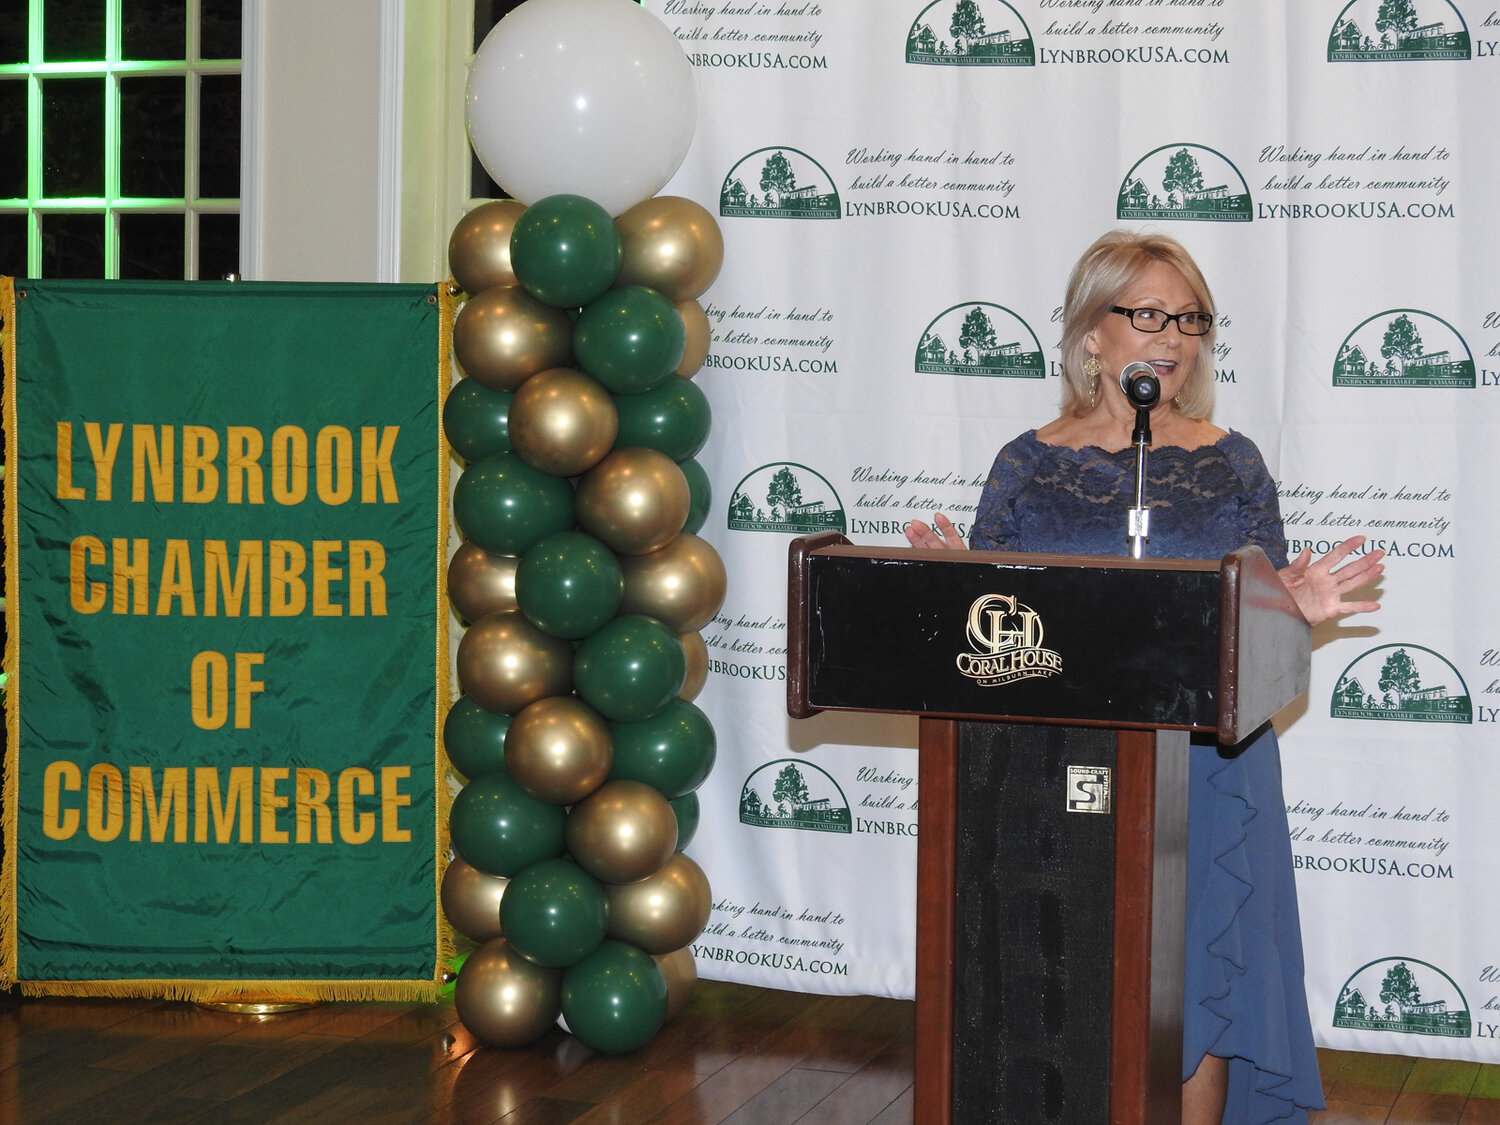 Lynbrook Chamber of Commerce President Polly Talbott speaking at the event.